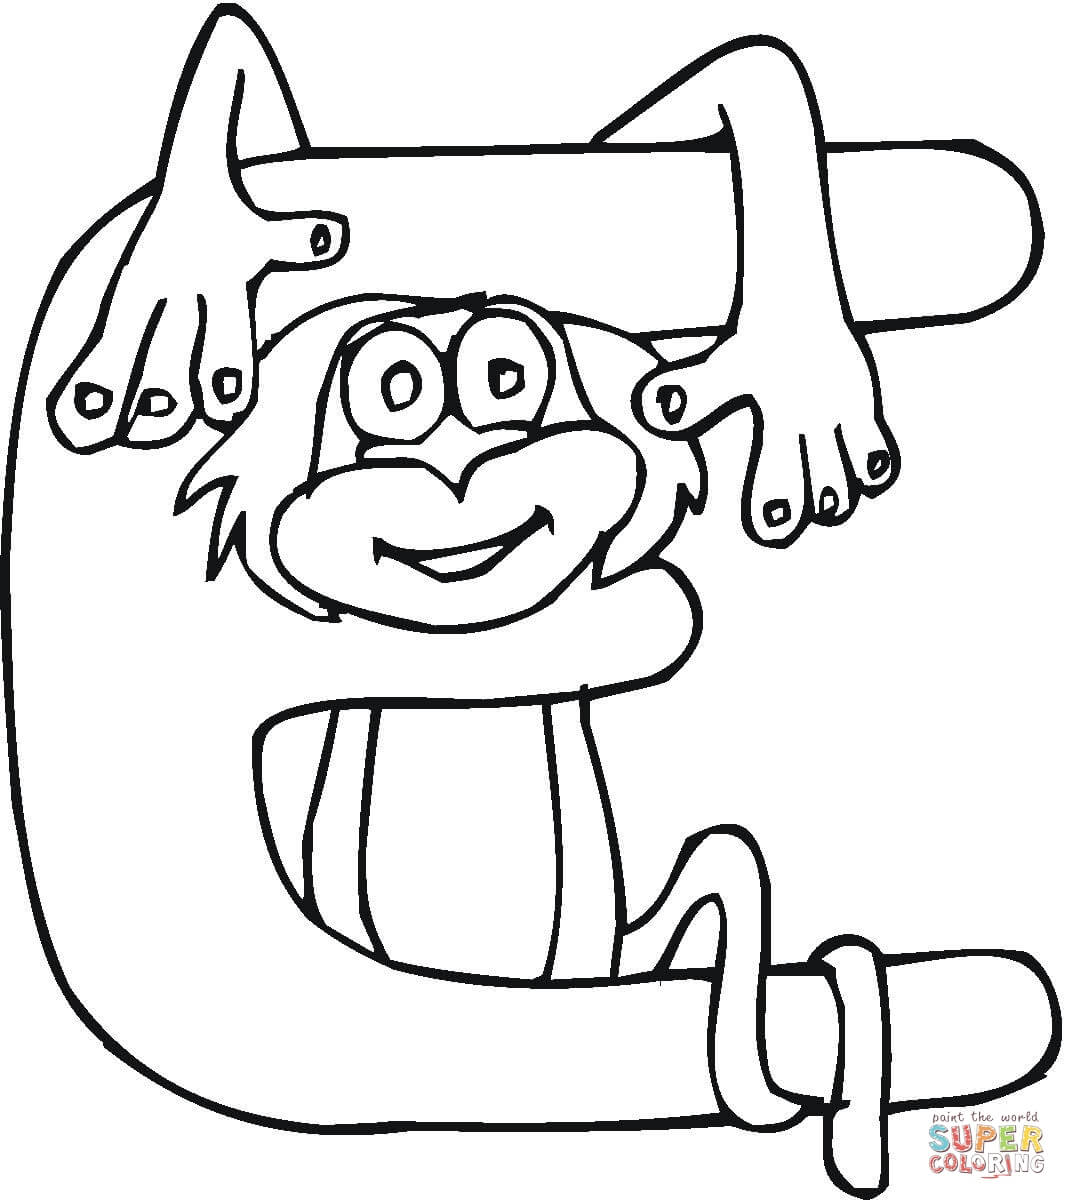 Letter E with Monkey Coloring Page